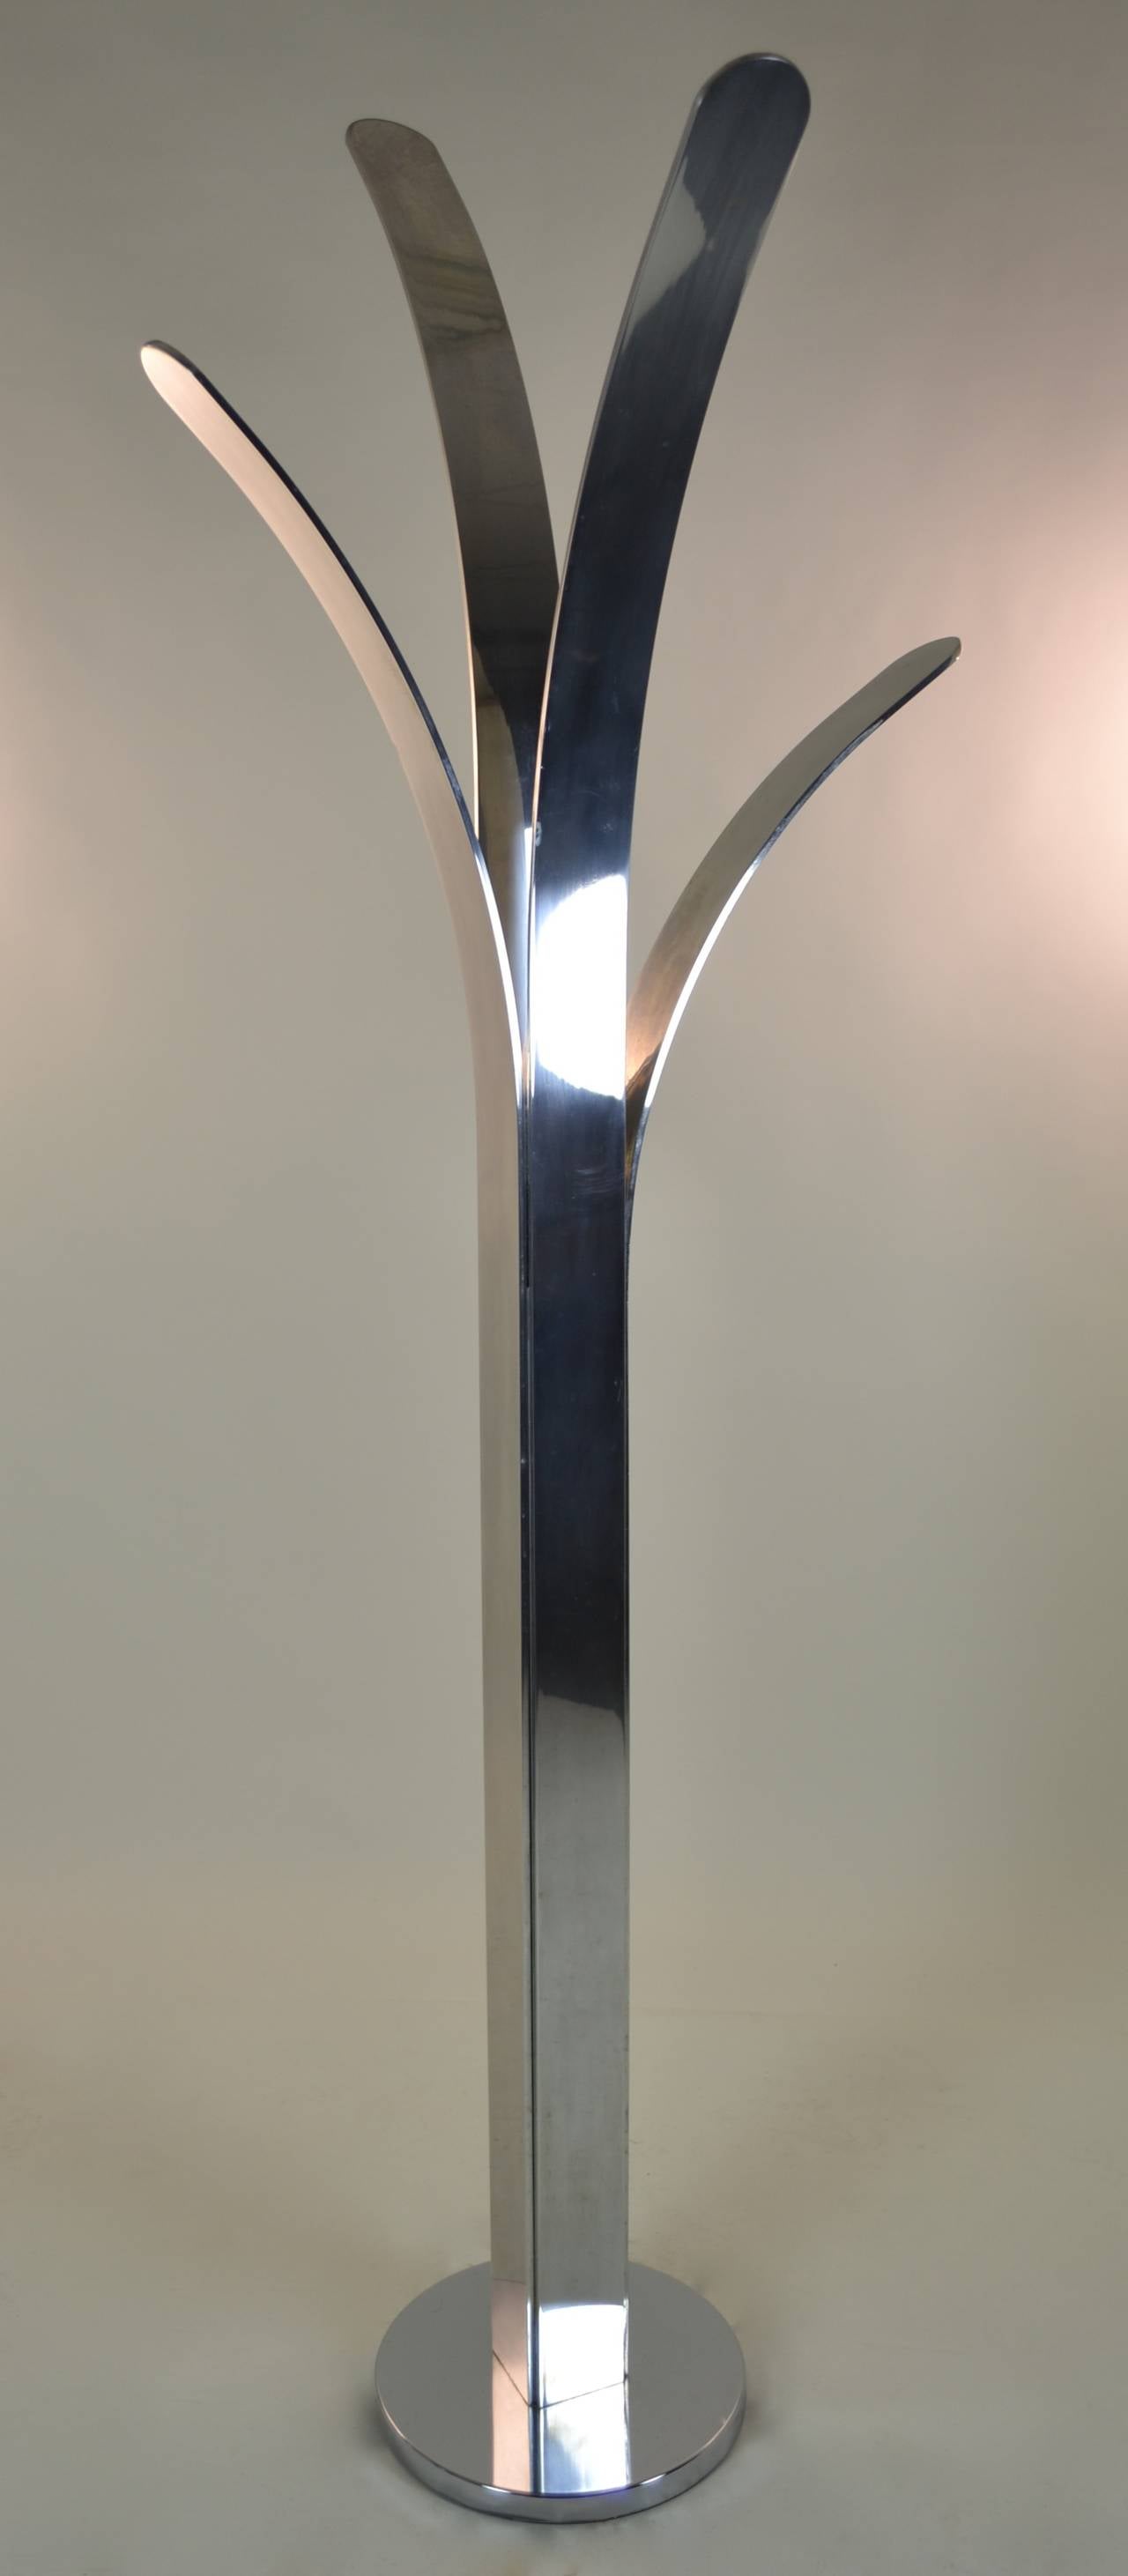 Unusual aluminum sculpture made of heavy sheet aluminum sections --polished and shaped in abstract floral design. Weighted base. Could be used as a coat rack.